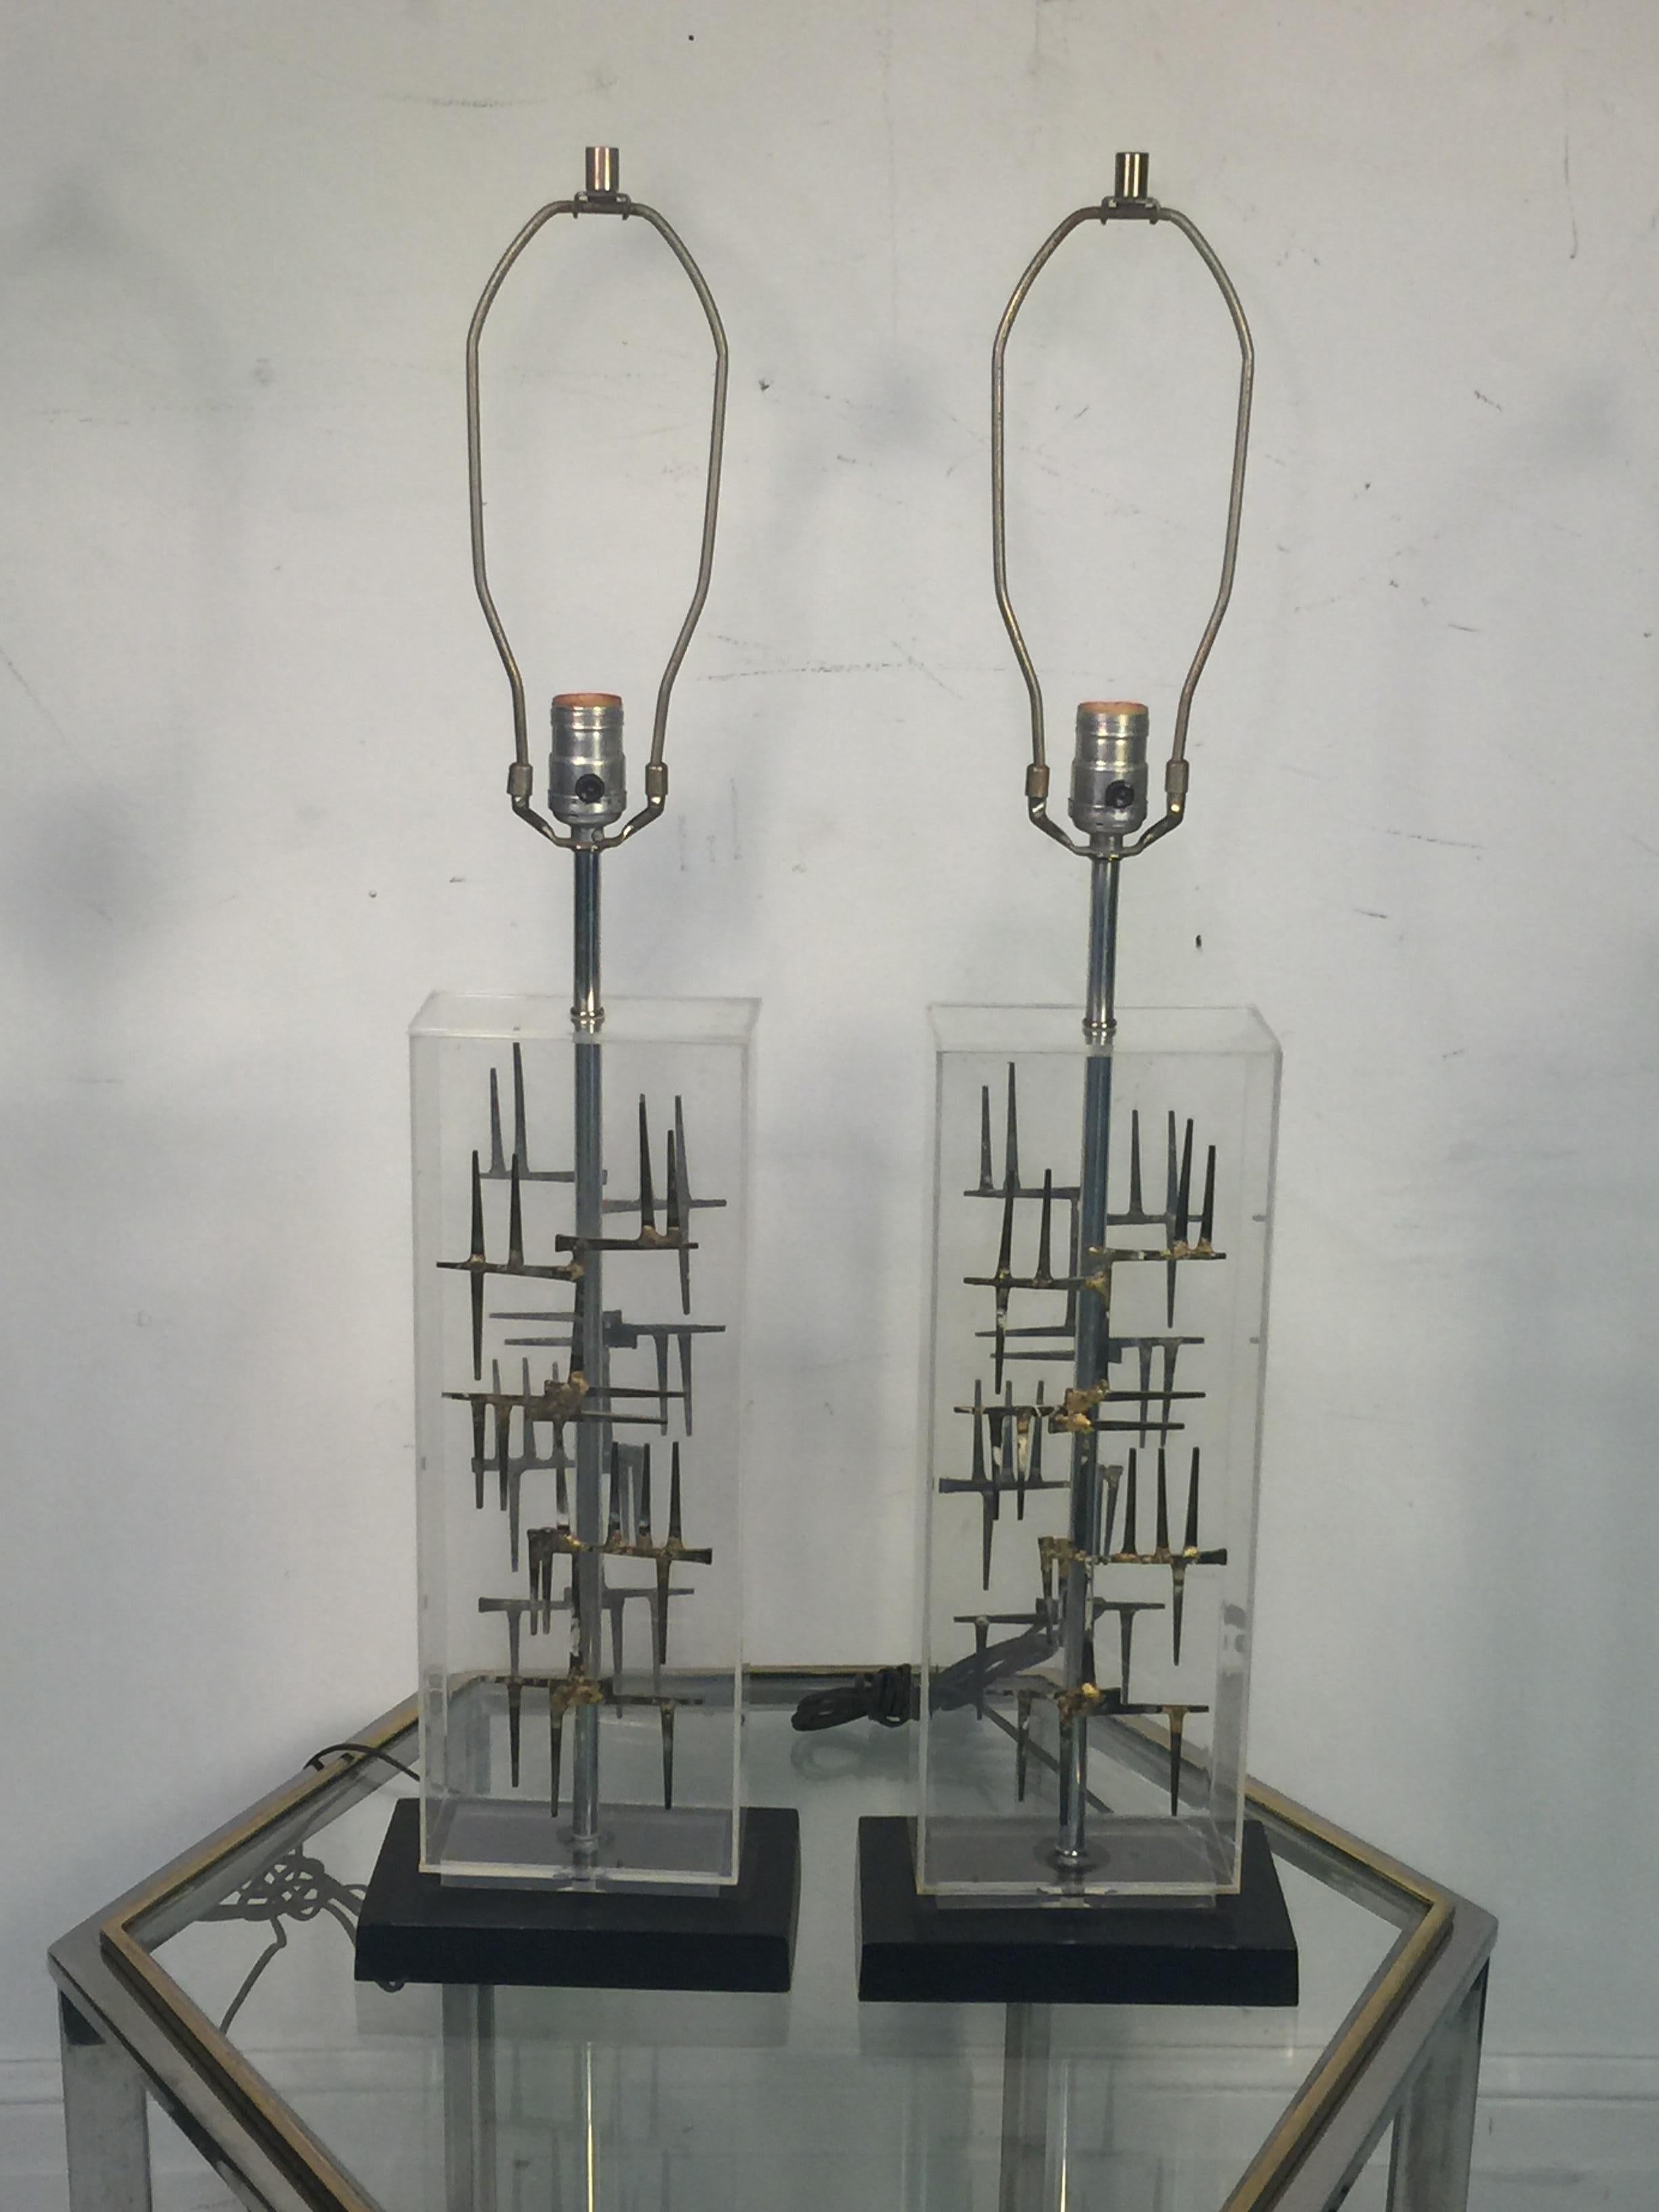 Pair of modernist Lucite rectangular form lamps with Brutalist nail design on both sides of the lamps mounted on a black enameled metal rectangular base designed in the 1960s.The Lucite lamp body measures at 18